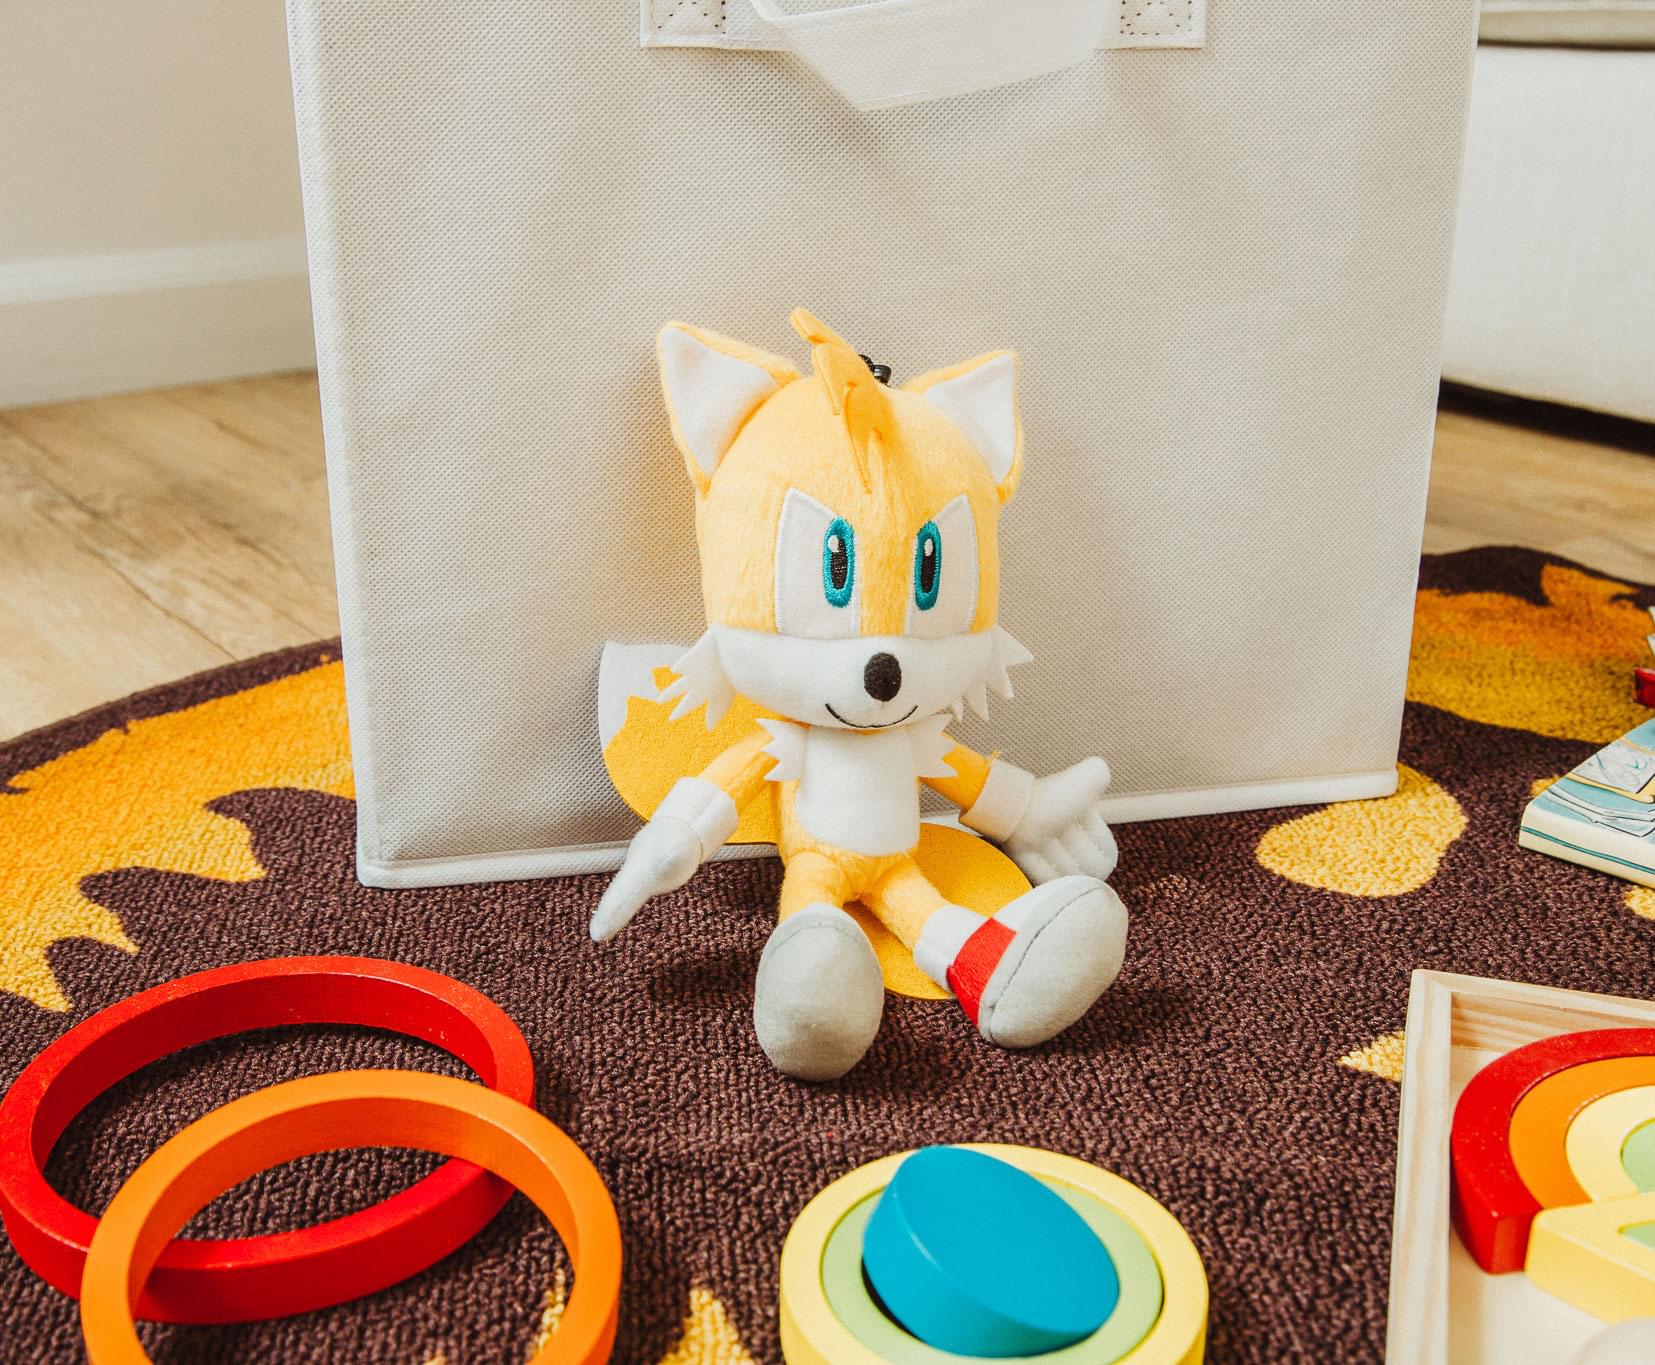 BRAND NEW! Large 12” Tails Sonic The Hedgehog Yellow Plush Stuffed